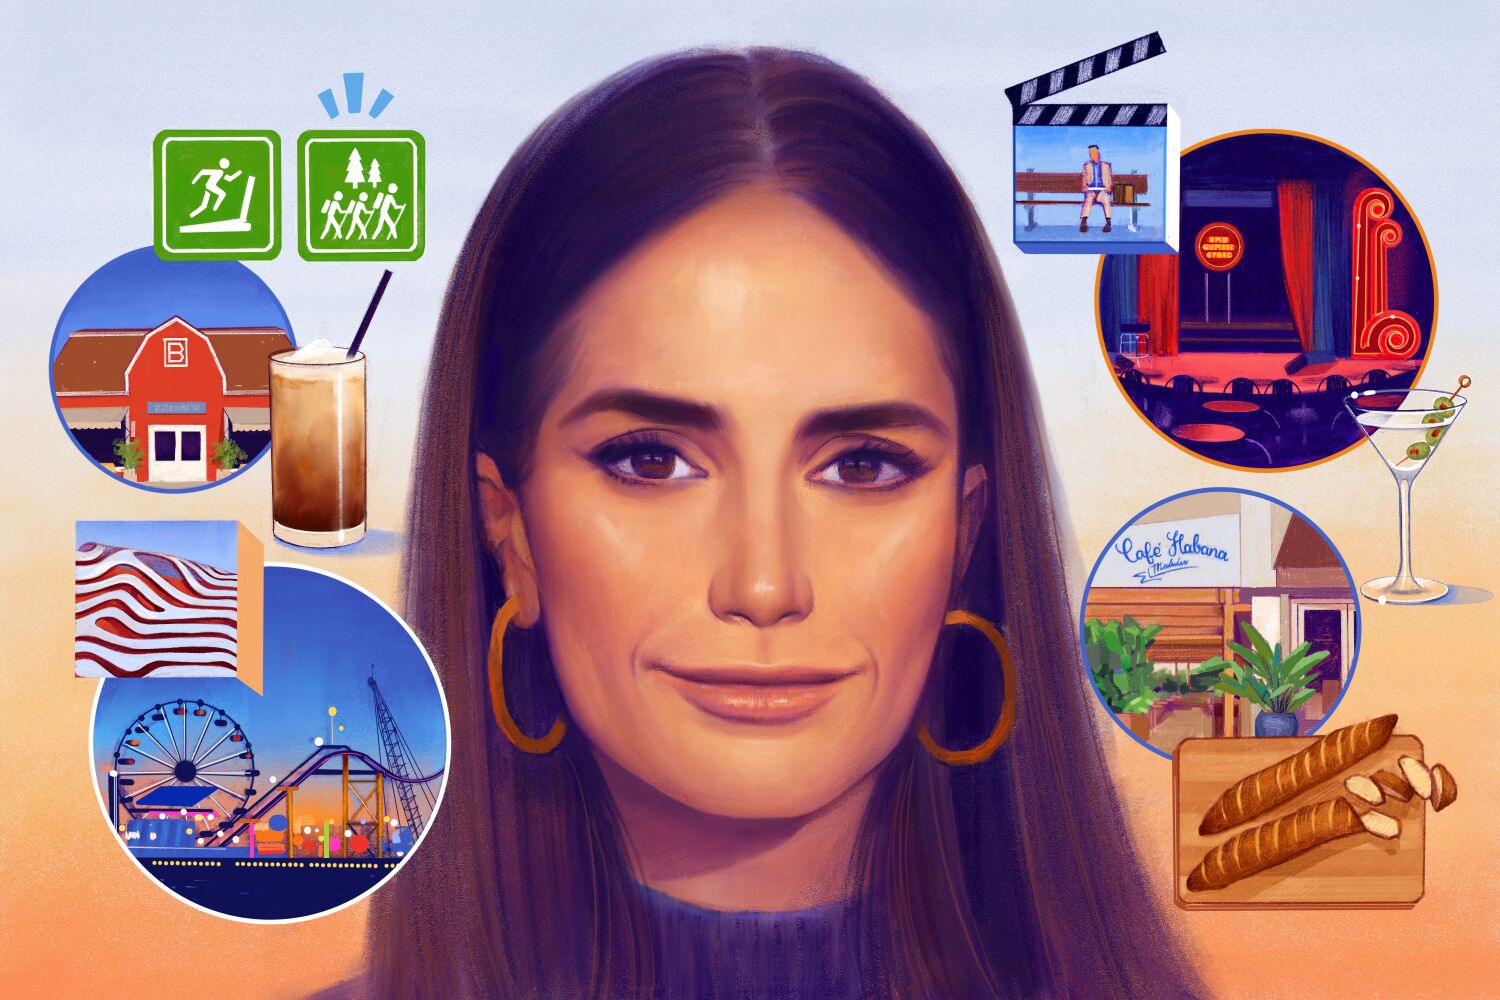 How to have the best Sunday in L.A., according to Jordana Brewster